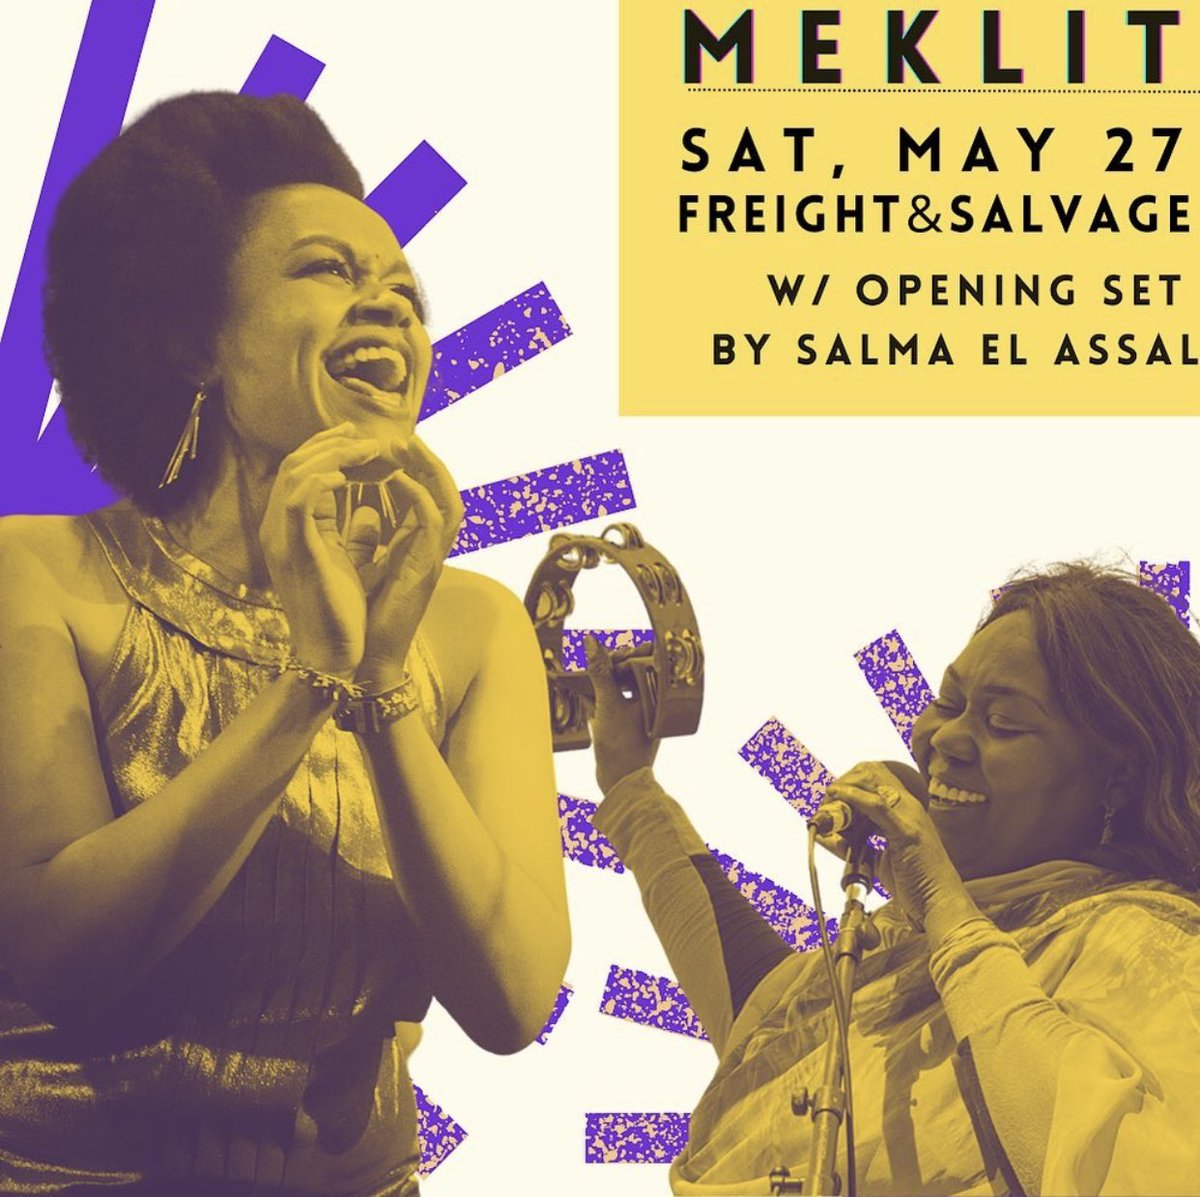 Bay Area fam- some musical relief coming this Sat night- join me, @meklitmusic & Salma Elassal for some traditional Ethiopian & Sudanese songs. Sudanis- bring lots of tissues cuz Salma’s set is all songs of home, love and longing 💔🇸🇩 TIX: bit.ly/MeklitFreight